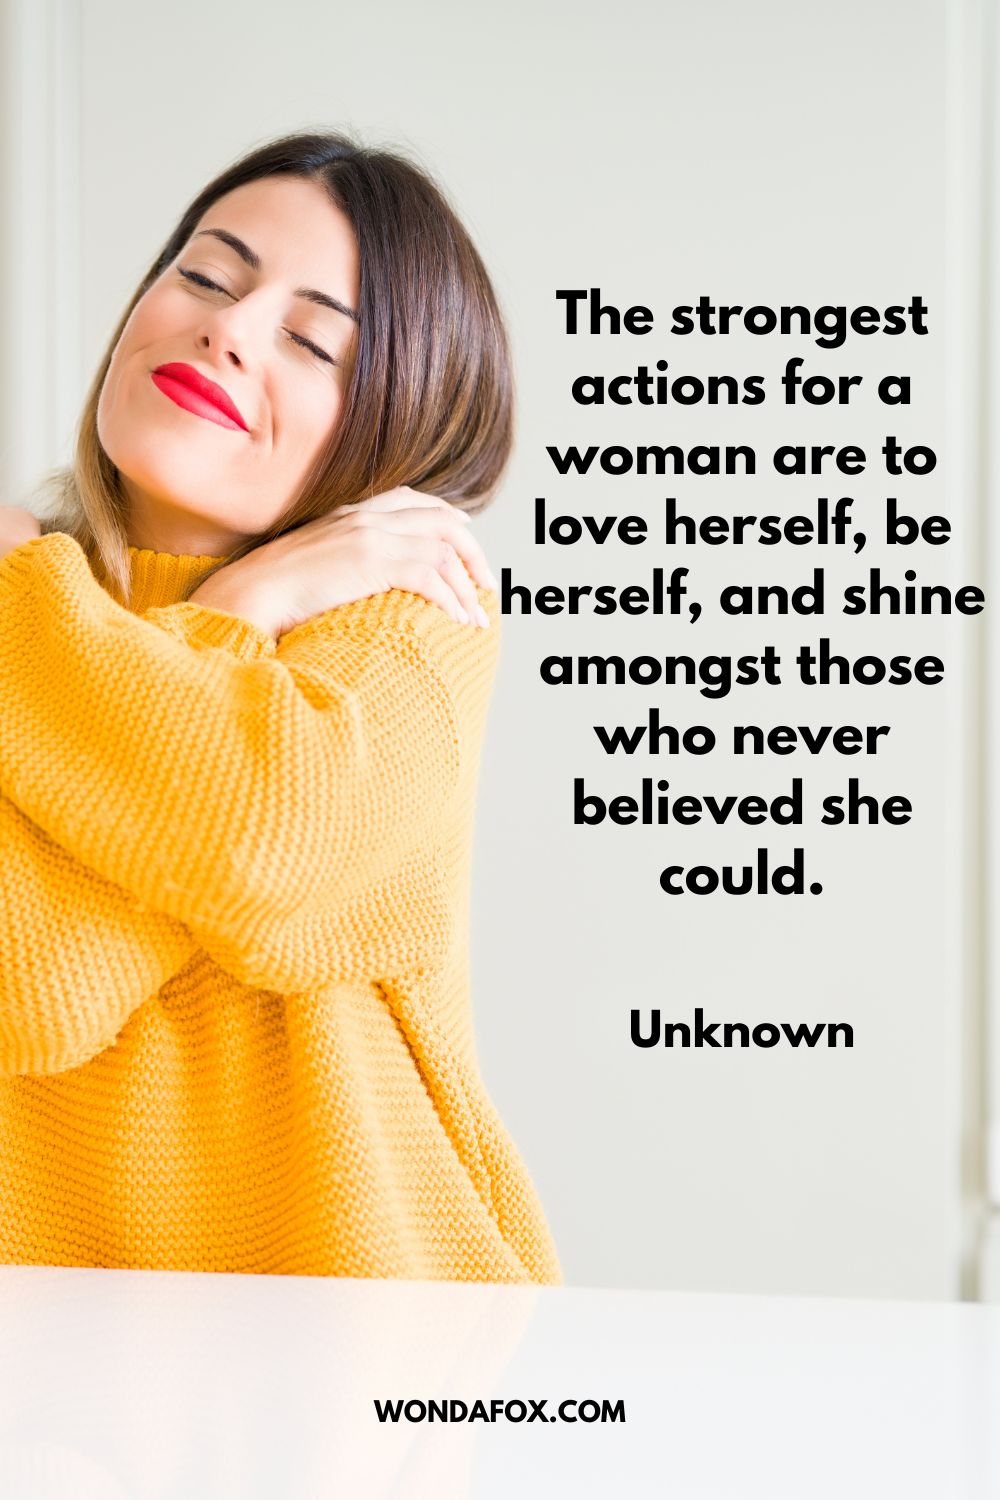 The strongest actions for a woman are to love herself, be herself, and shine amongst those who never believed she could. Unknown